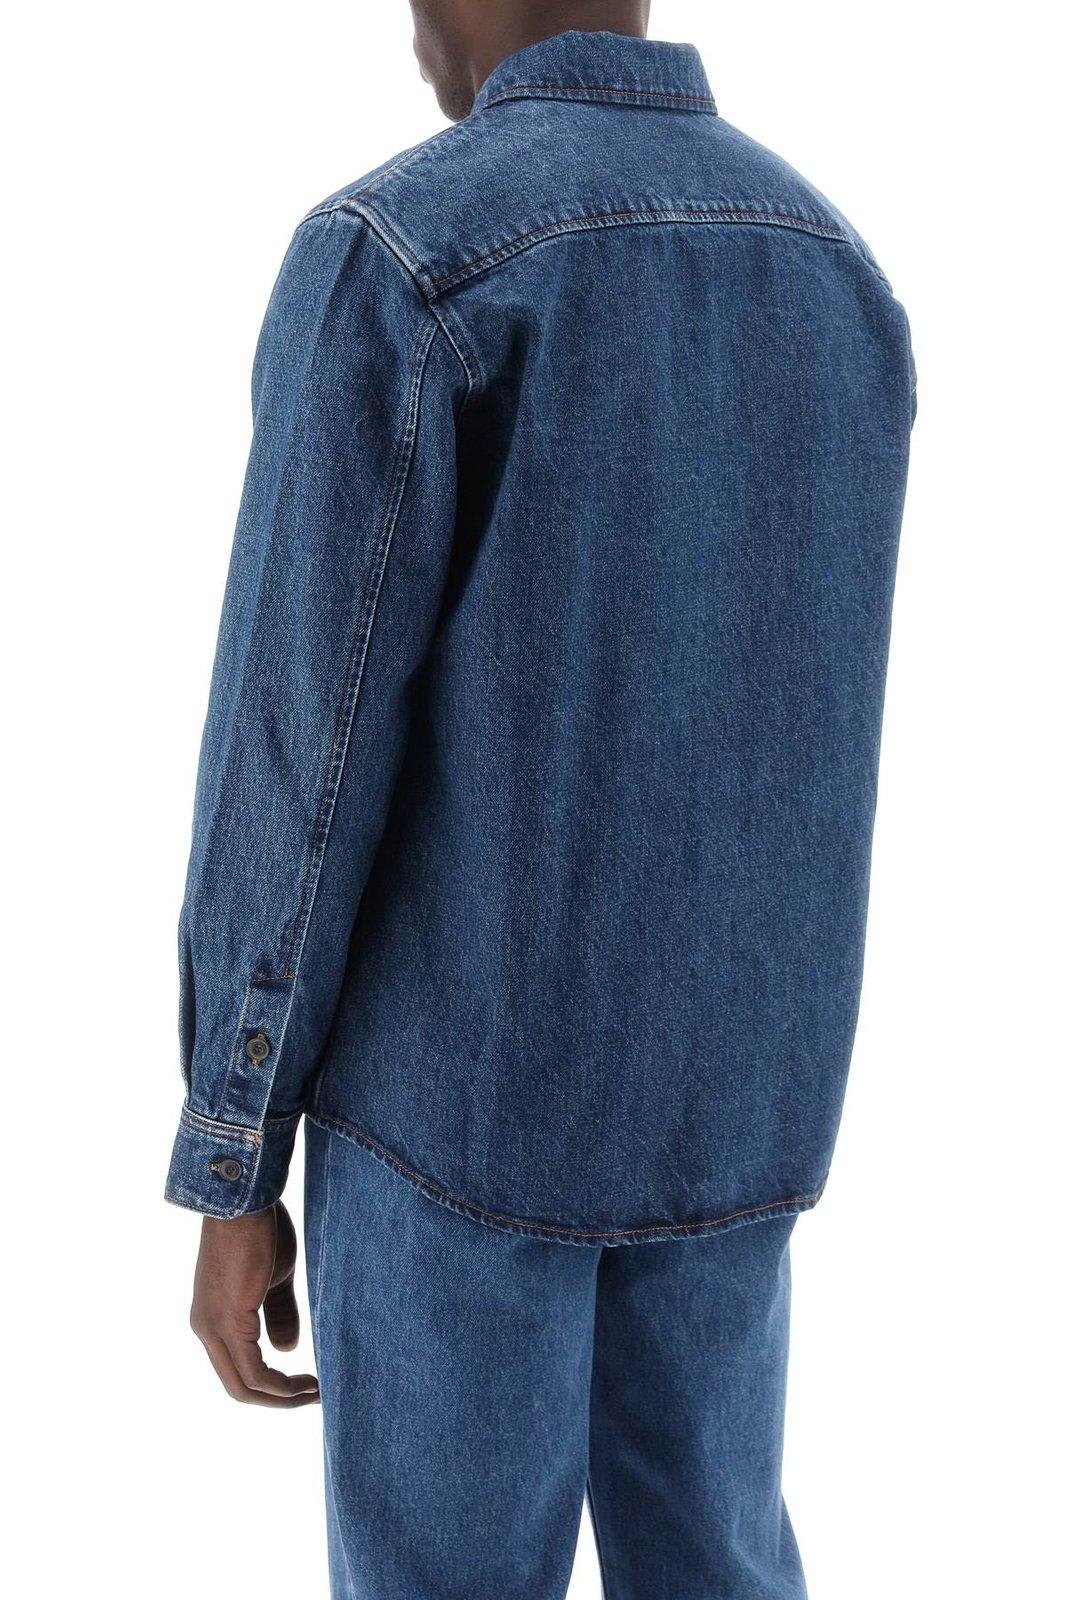 Shop Apc Logo Embroidered Buttoned Denim Shirt In Blue